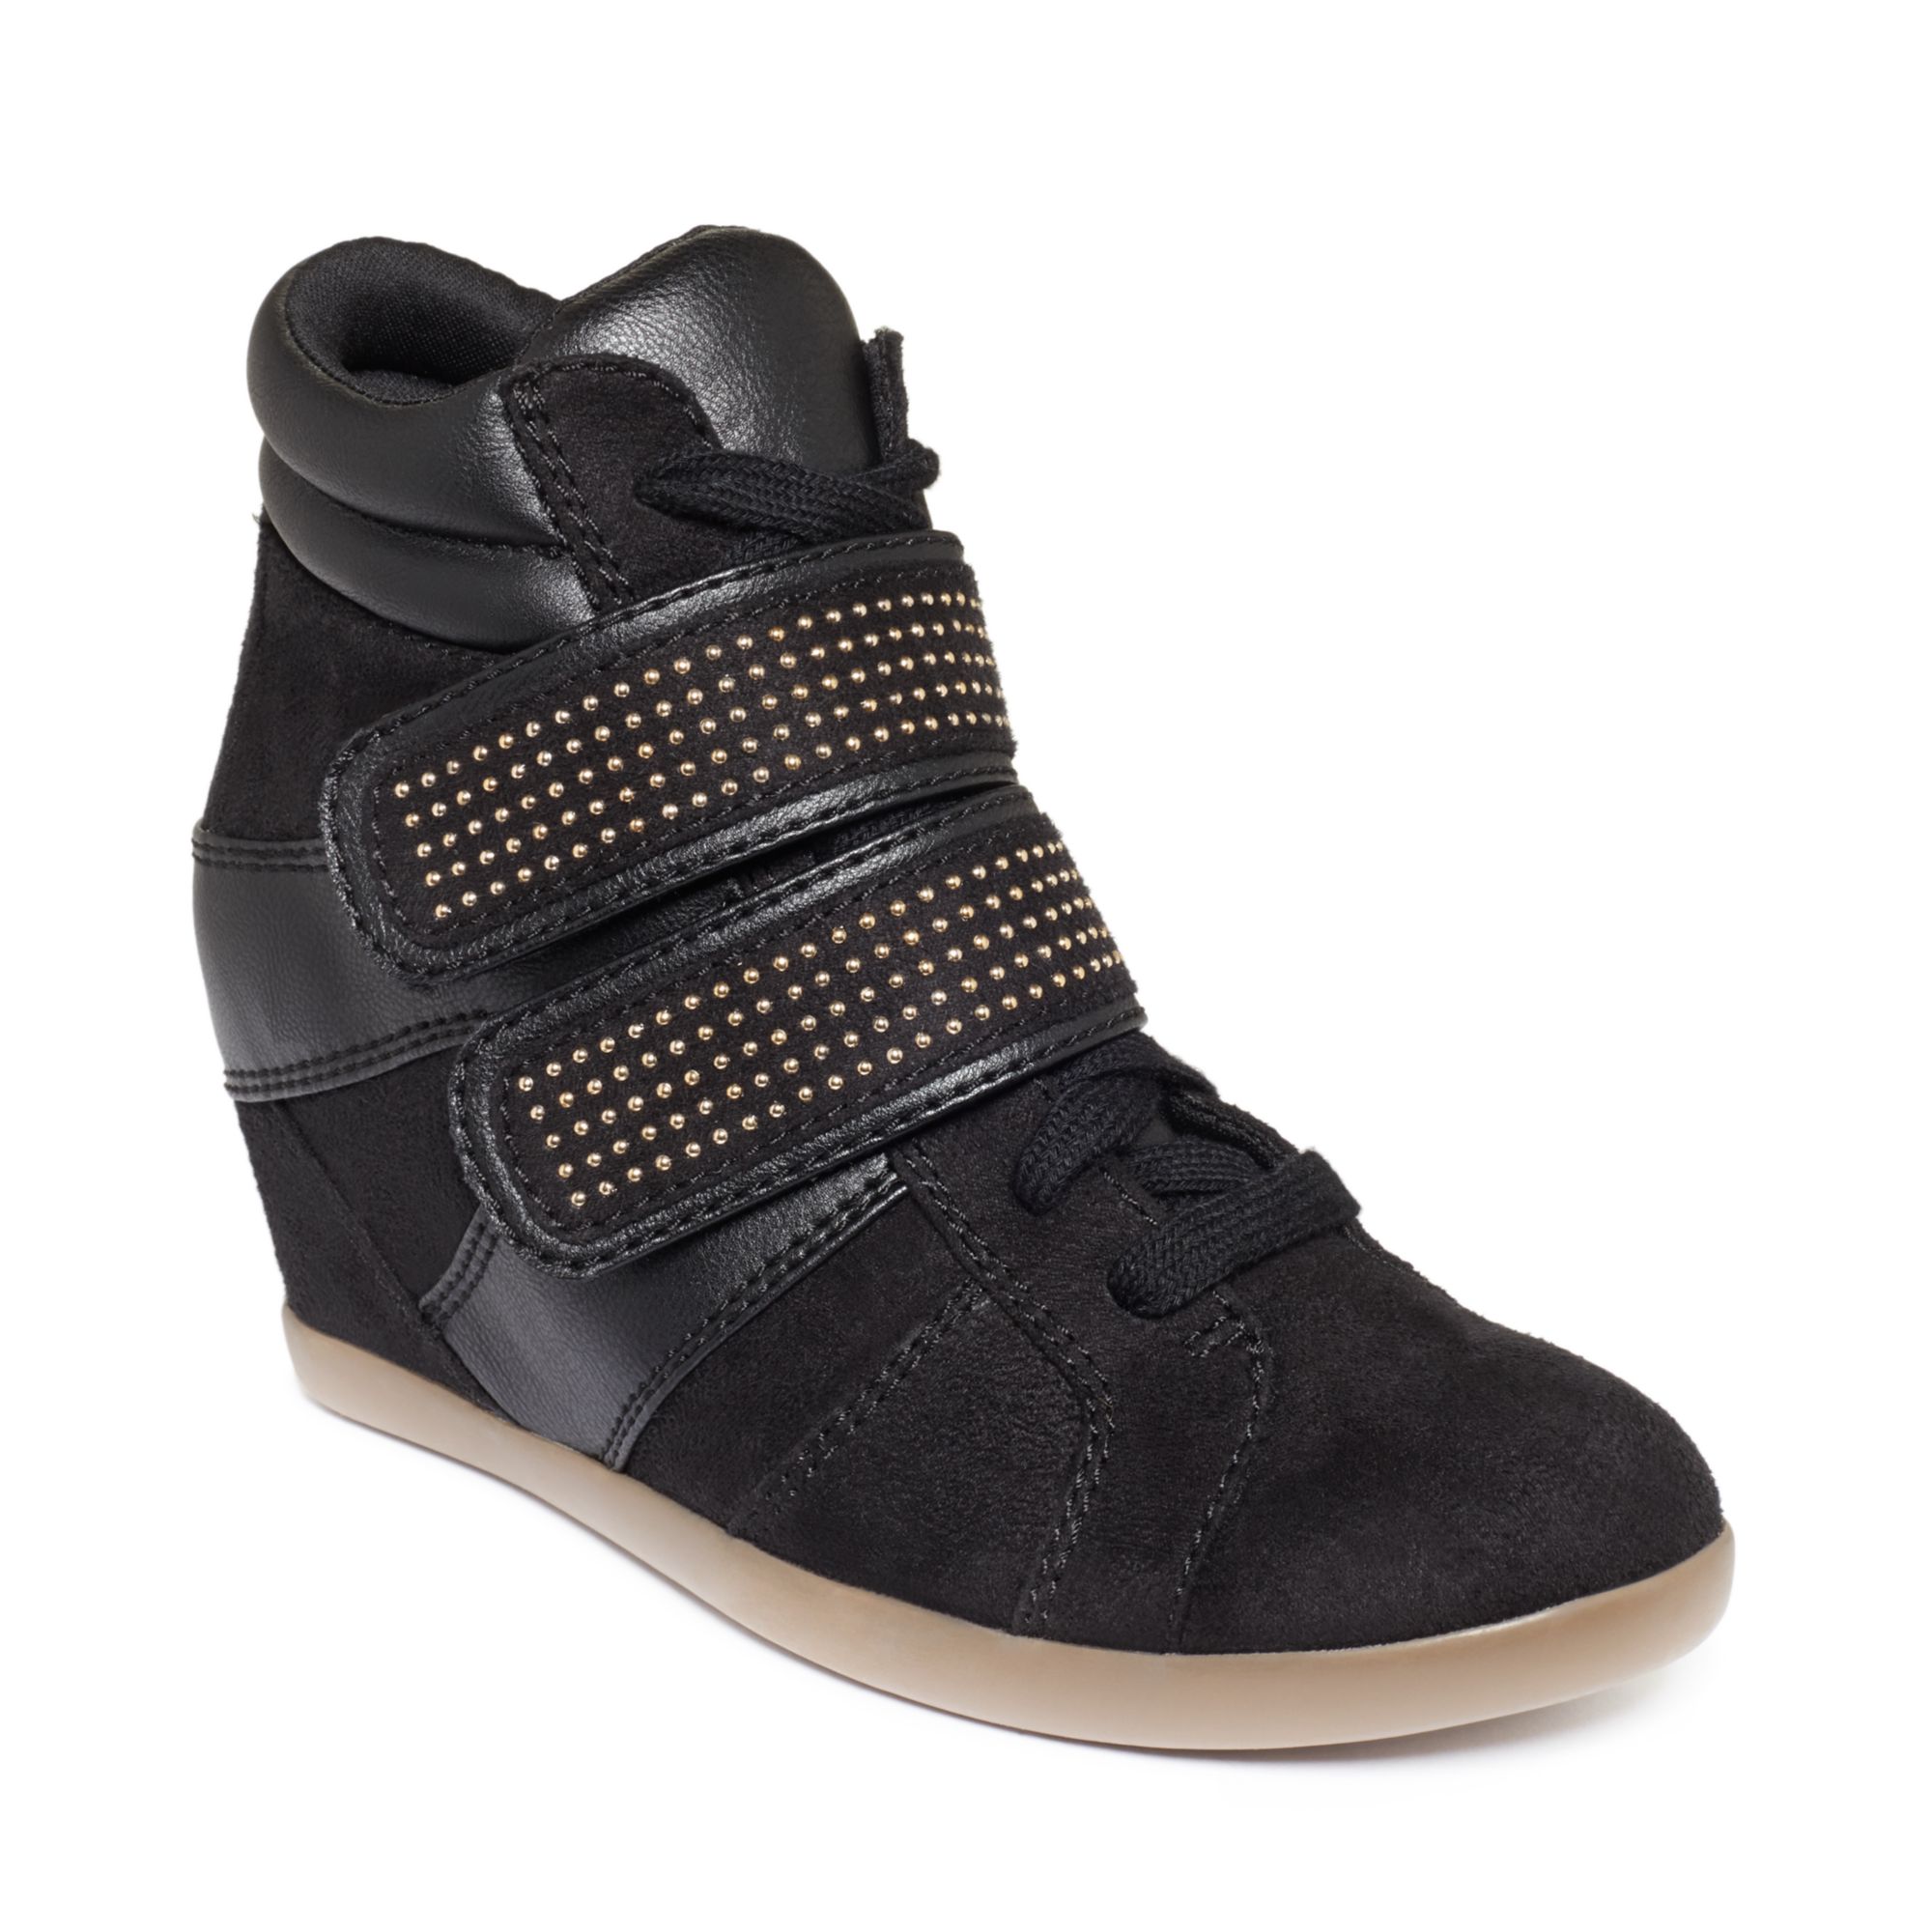 Lyst - Material Girl Visitor Studded Wedge Sneakers in Black